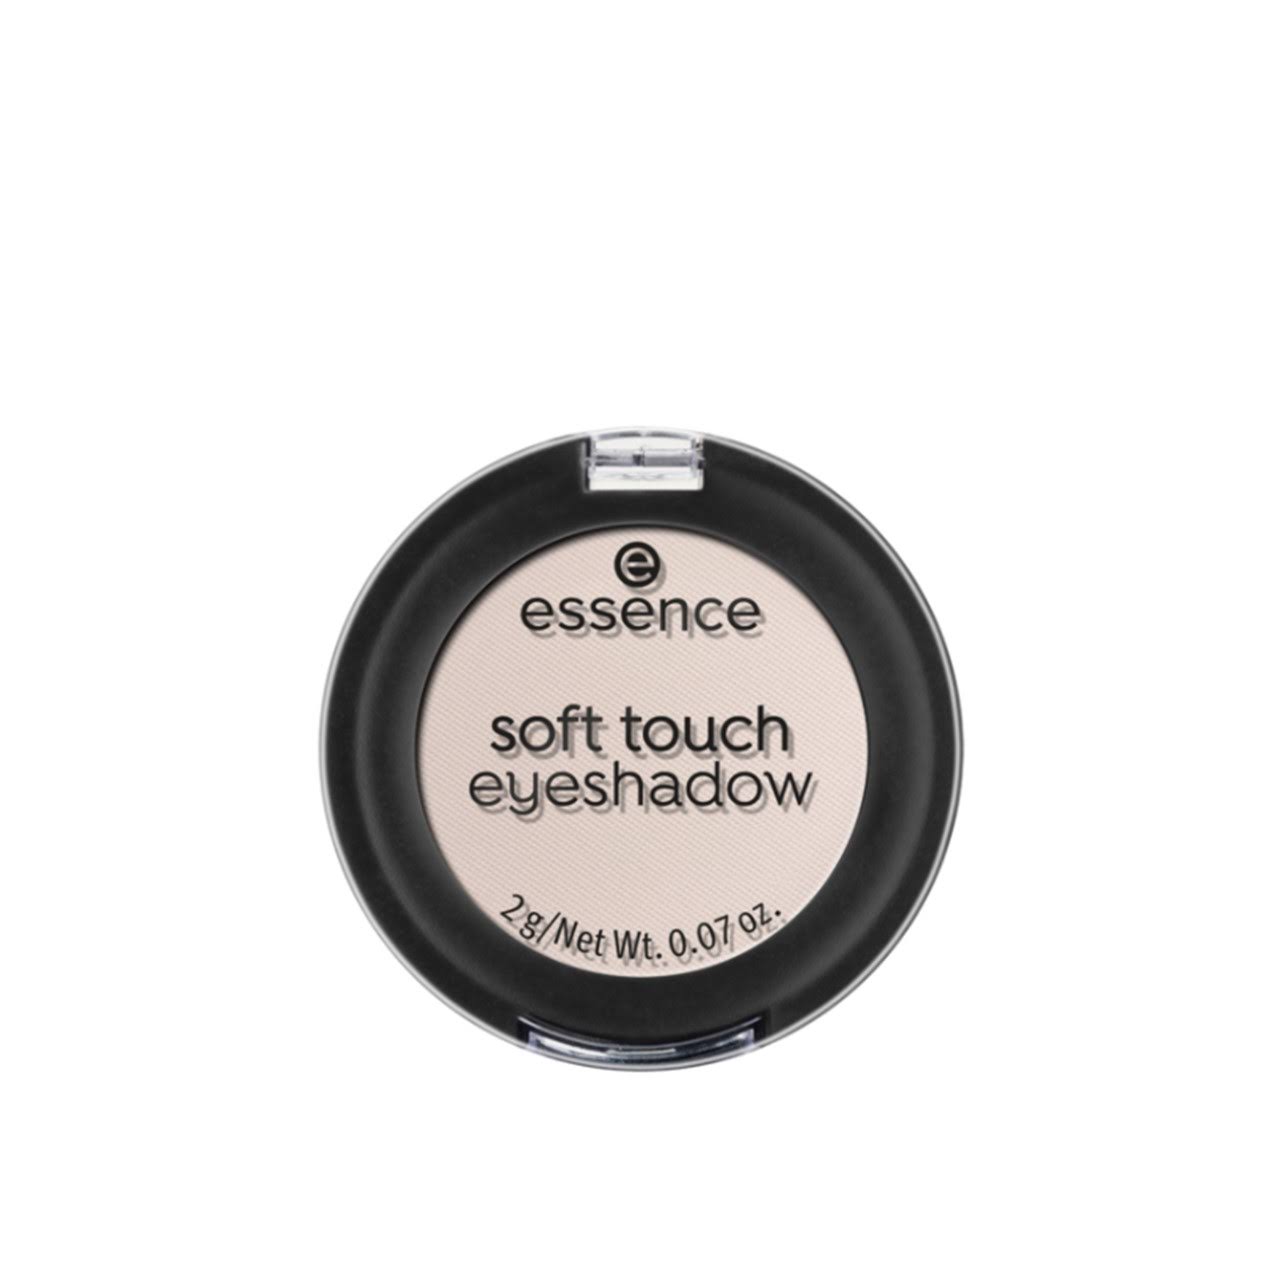 essence Soft Touch Eyeshadow 01 The One 2g